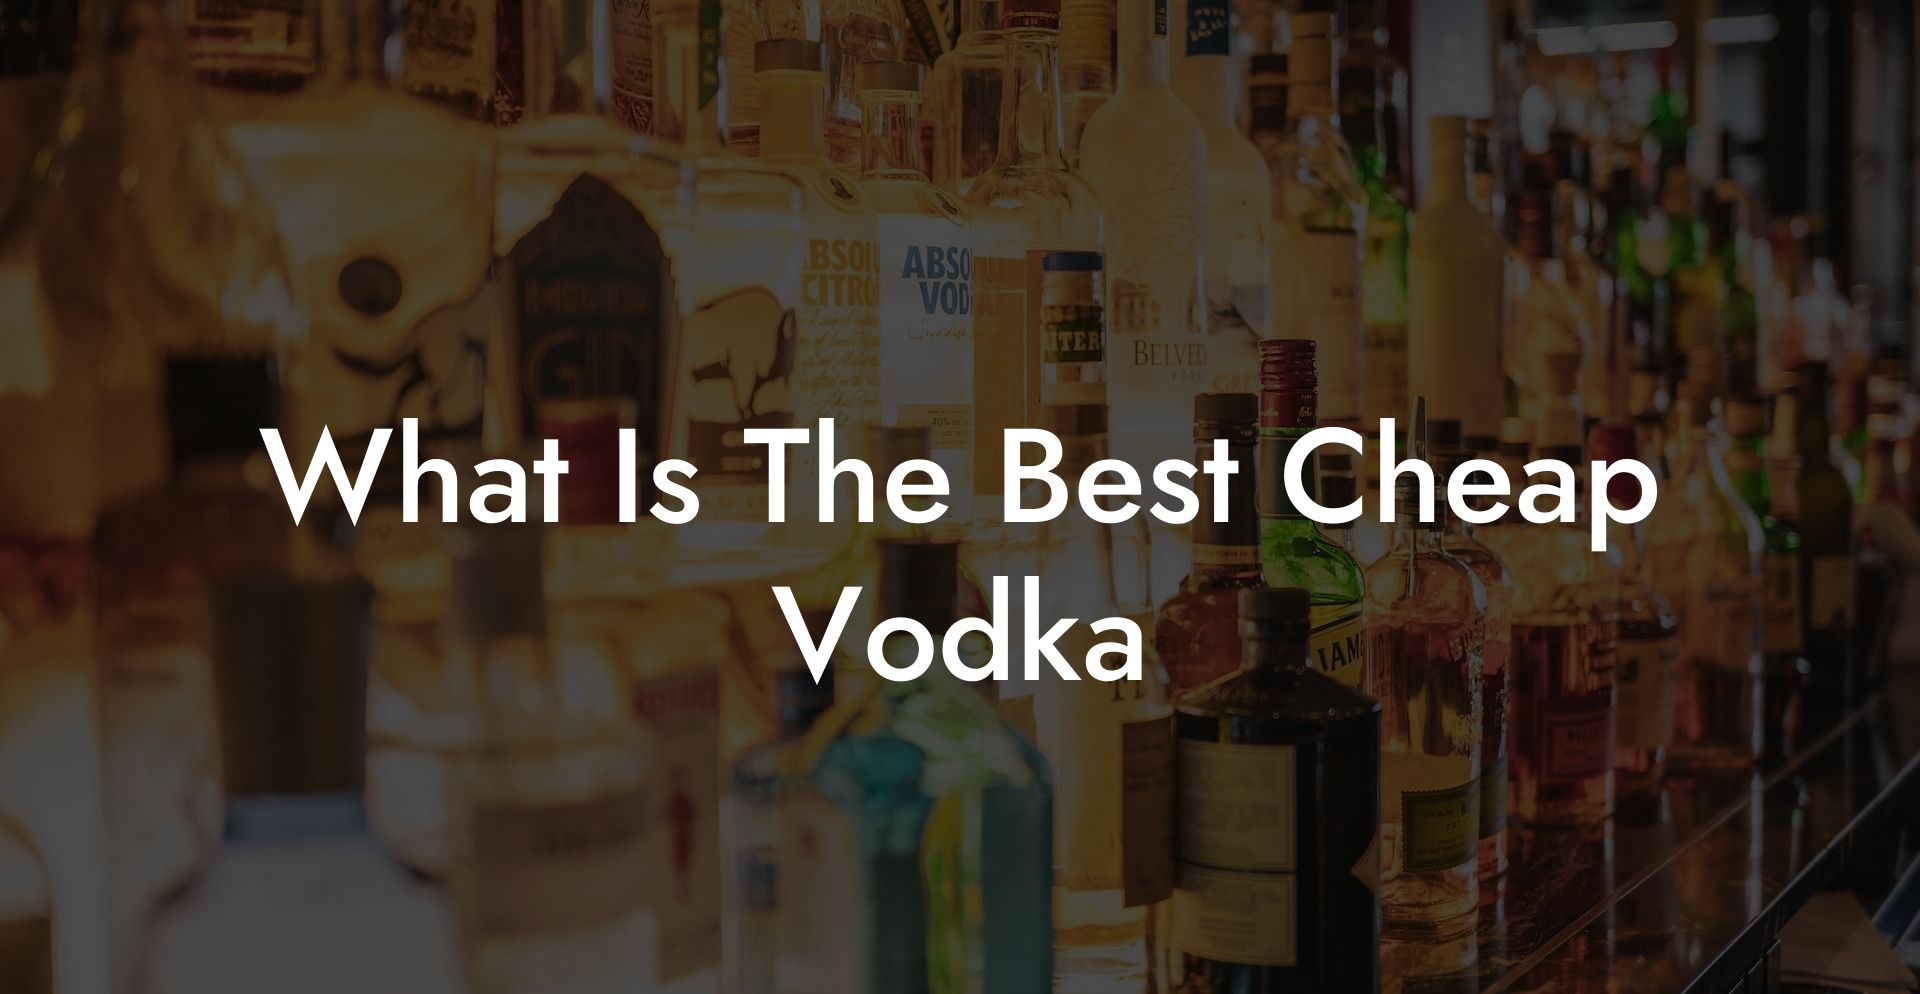 What Is The Best Cheap Vodka